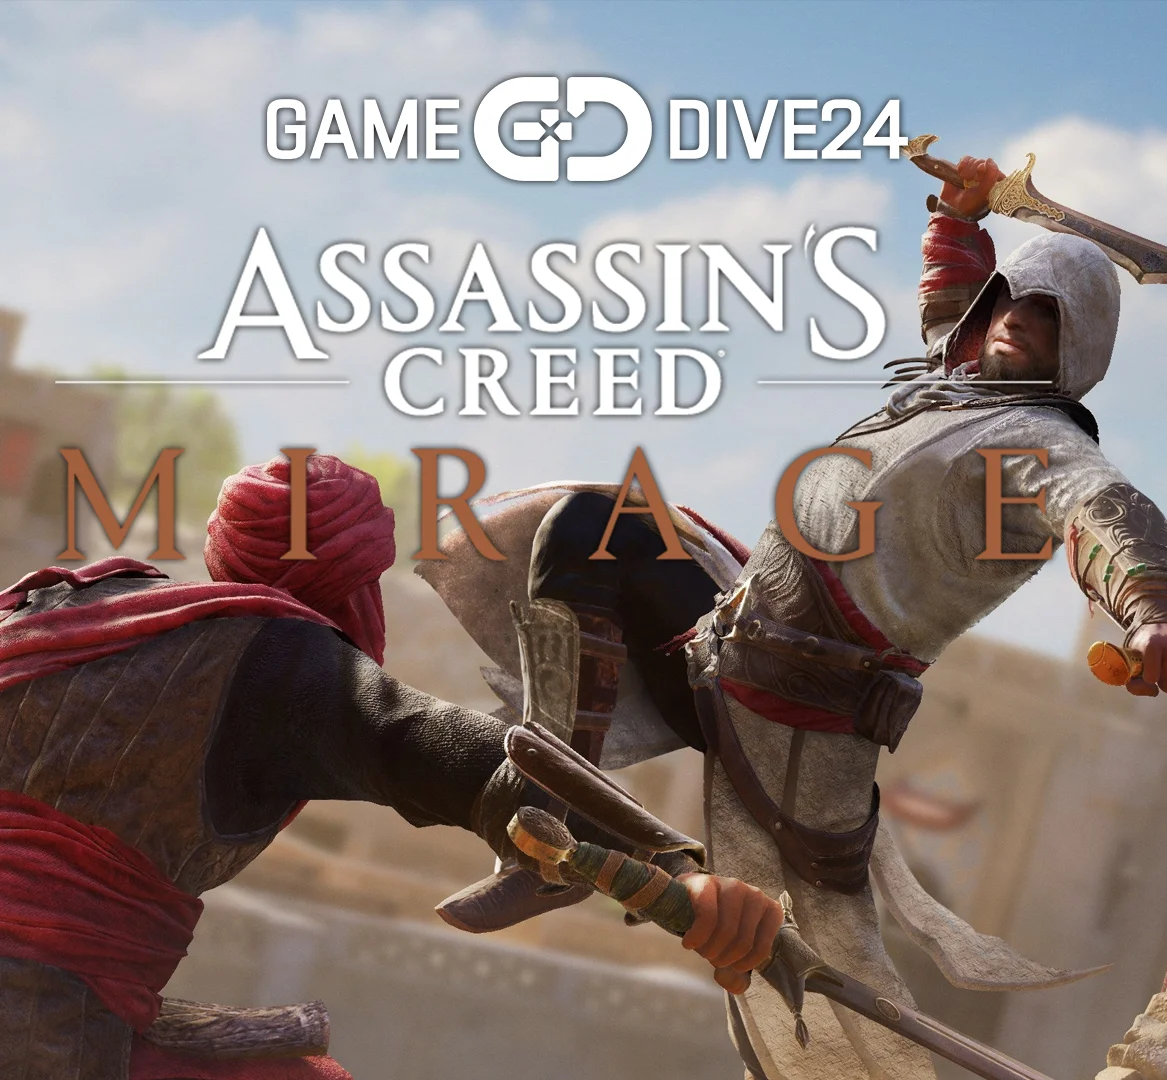 Assassin’s Creed Mirage Return to the Roots of the Series with Success